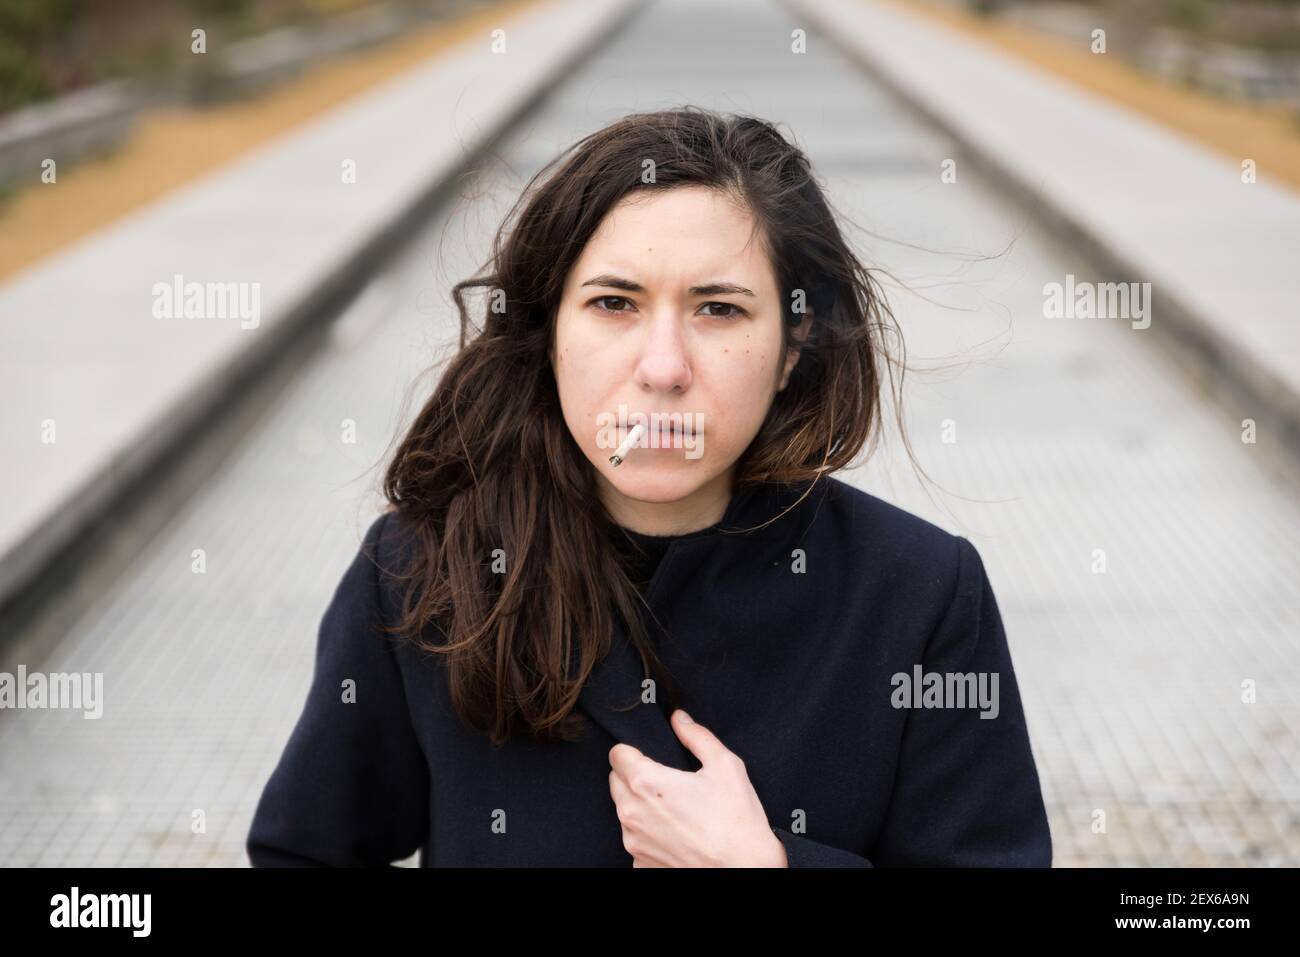 Outdoors portrait of a 28 year old white woman with brown hair, smoking Stock Photo